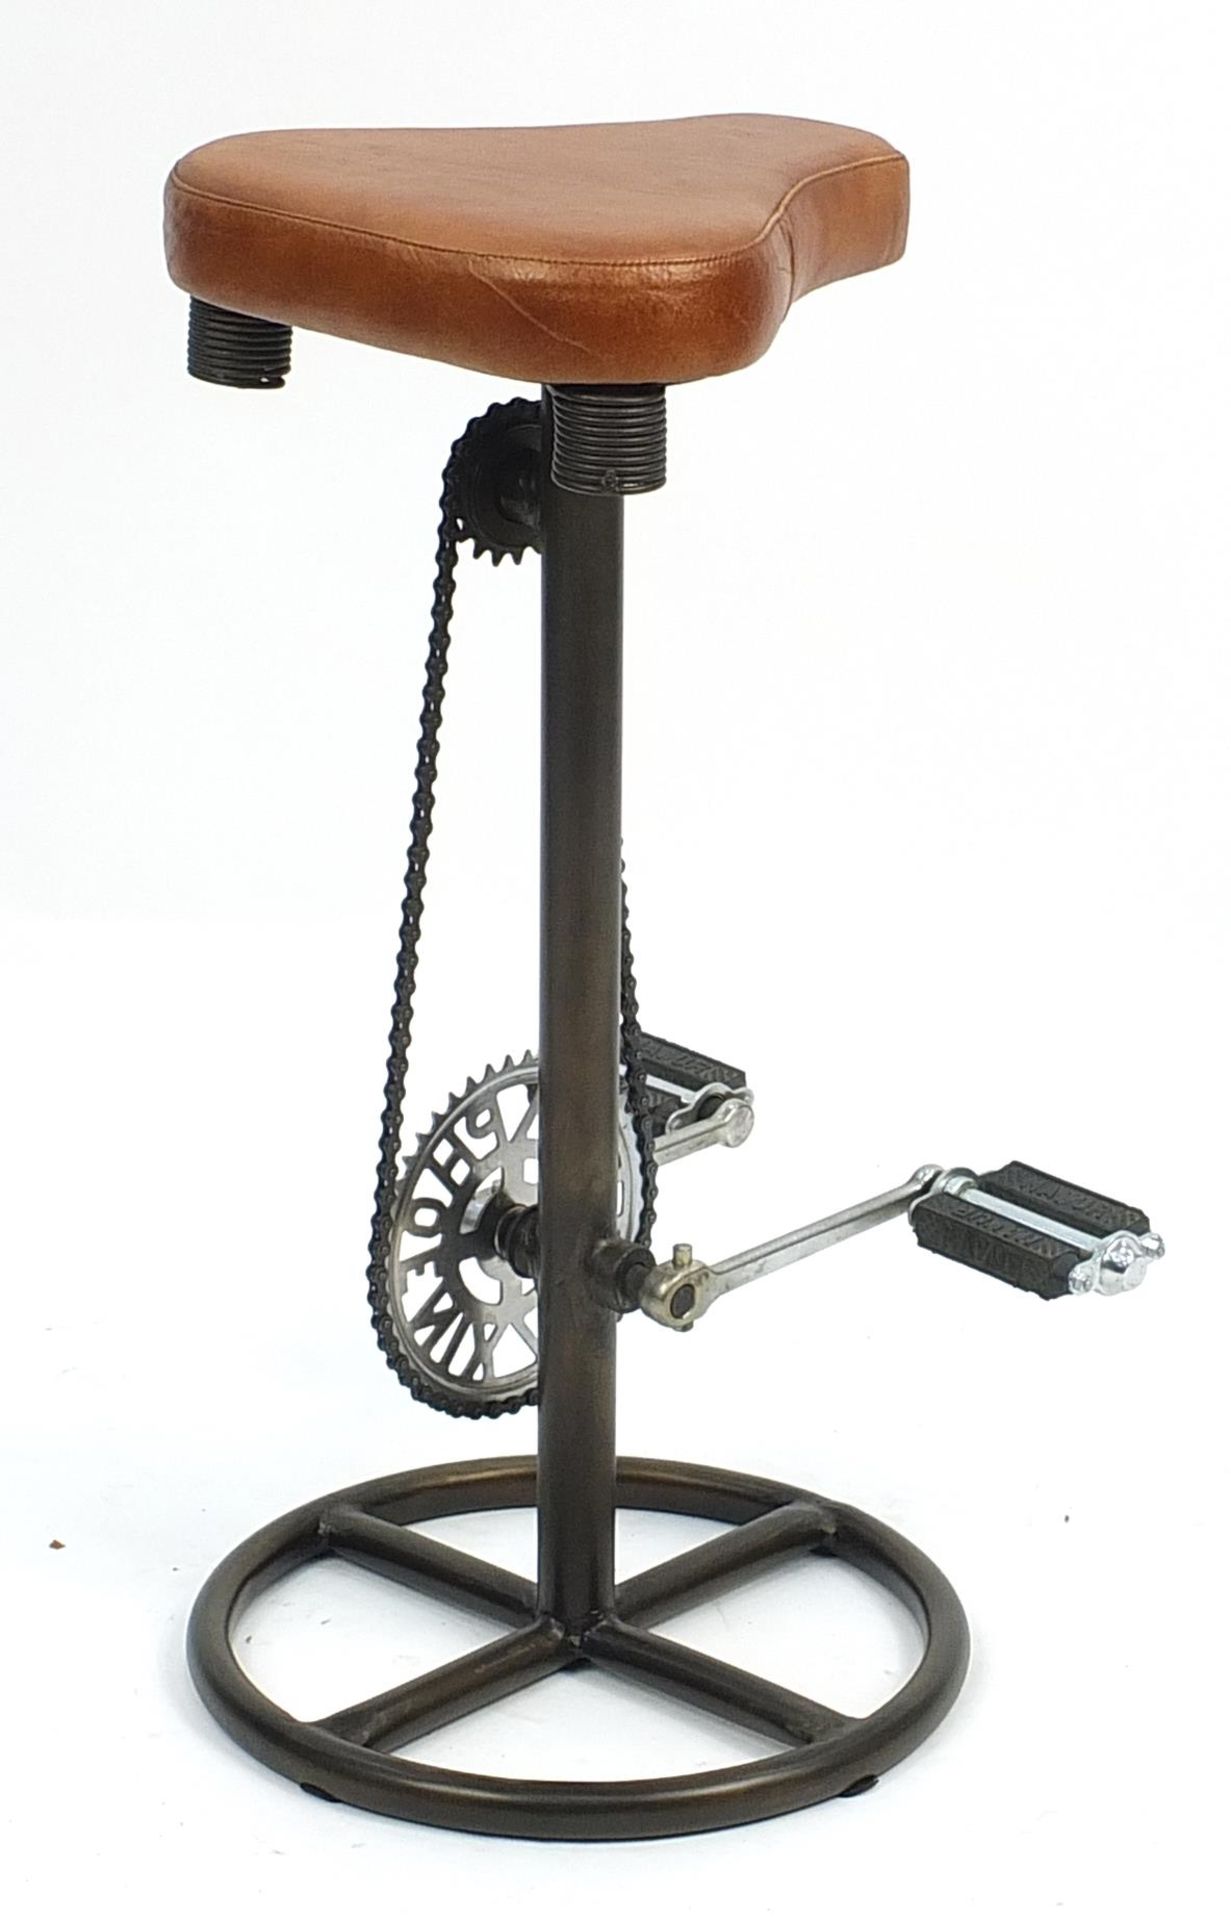 Industrial bar stool with bicycle pedal and chain footrest, 74cm high - Image 2 of 3